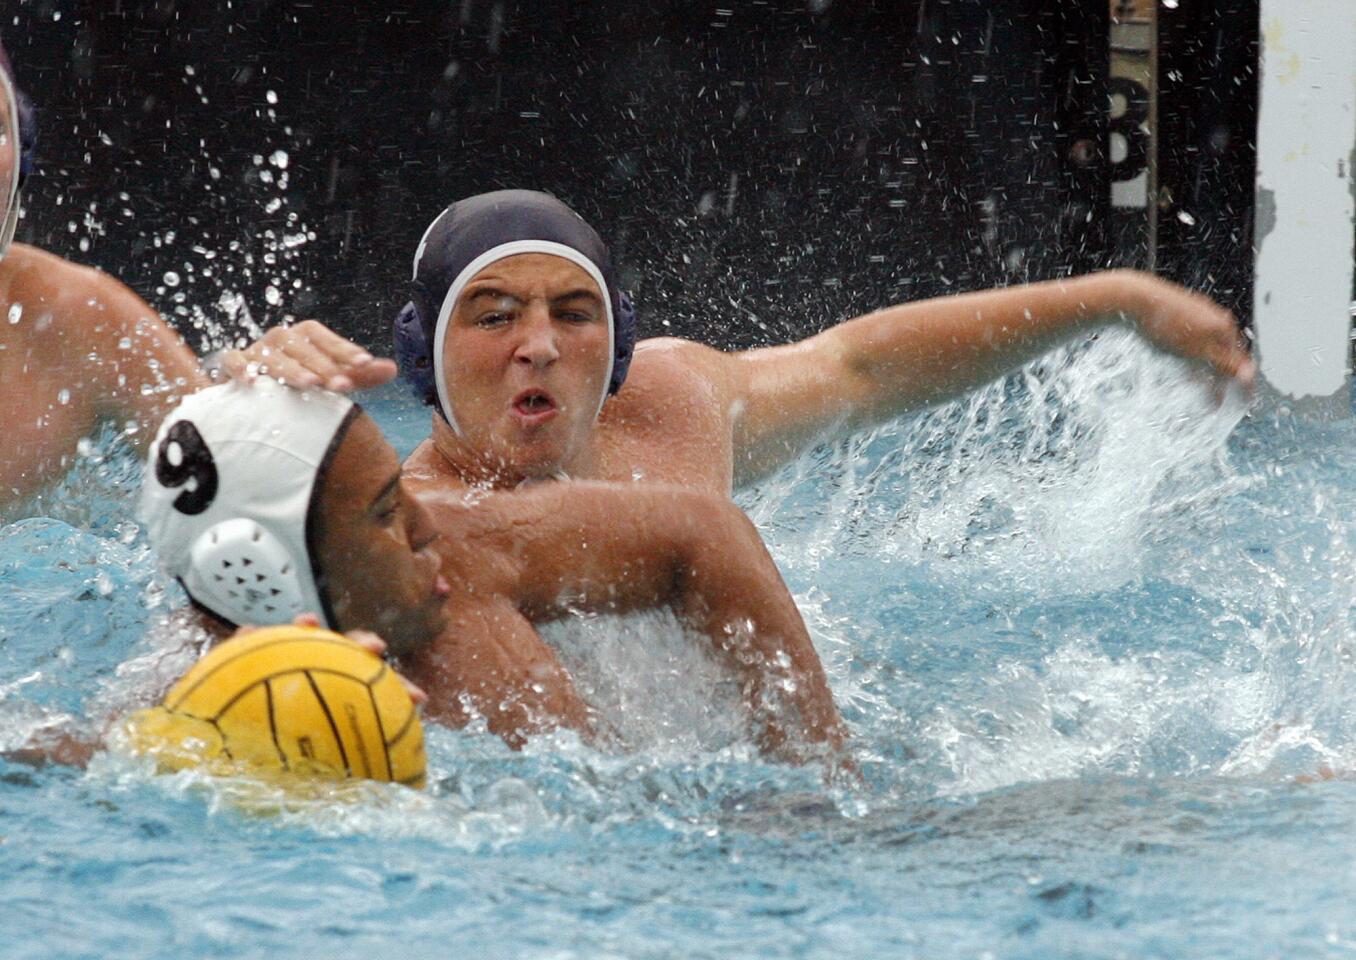 The defense of Crescenta Valley's Alexander Trimis pushes onto Hoover's Ryan Moguel in a Pacific League boys water polo match at Crescenta Valley High School on Thursday, October 11, 2012.